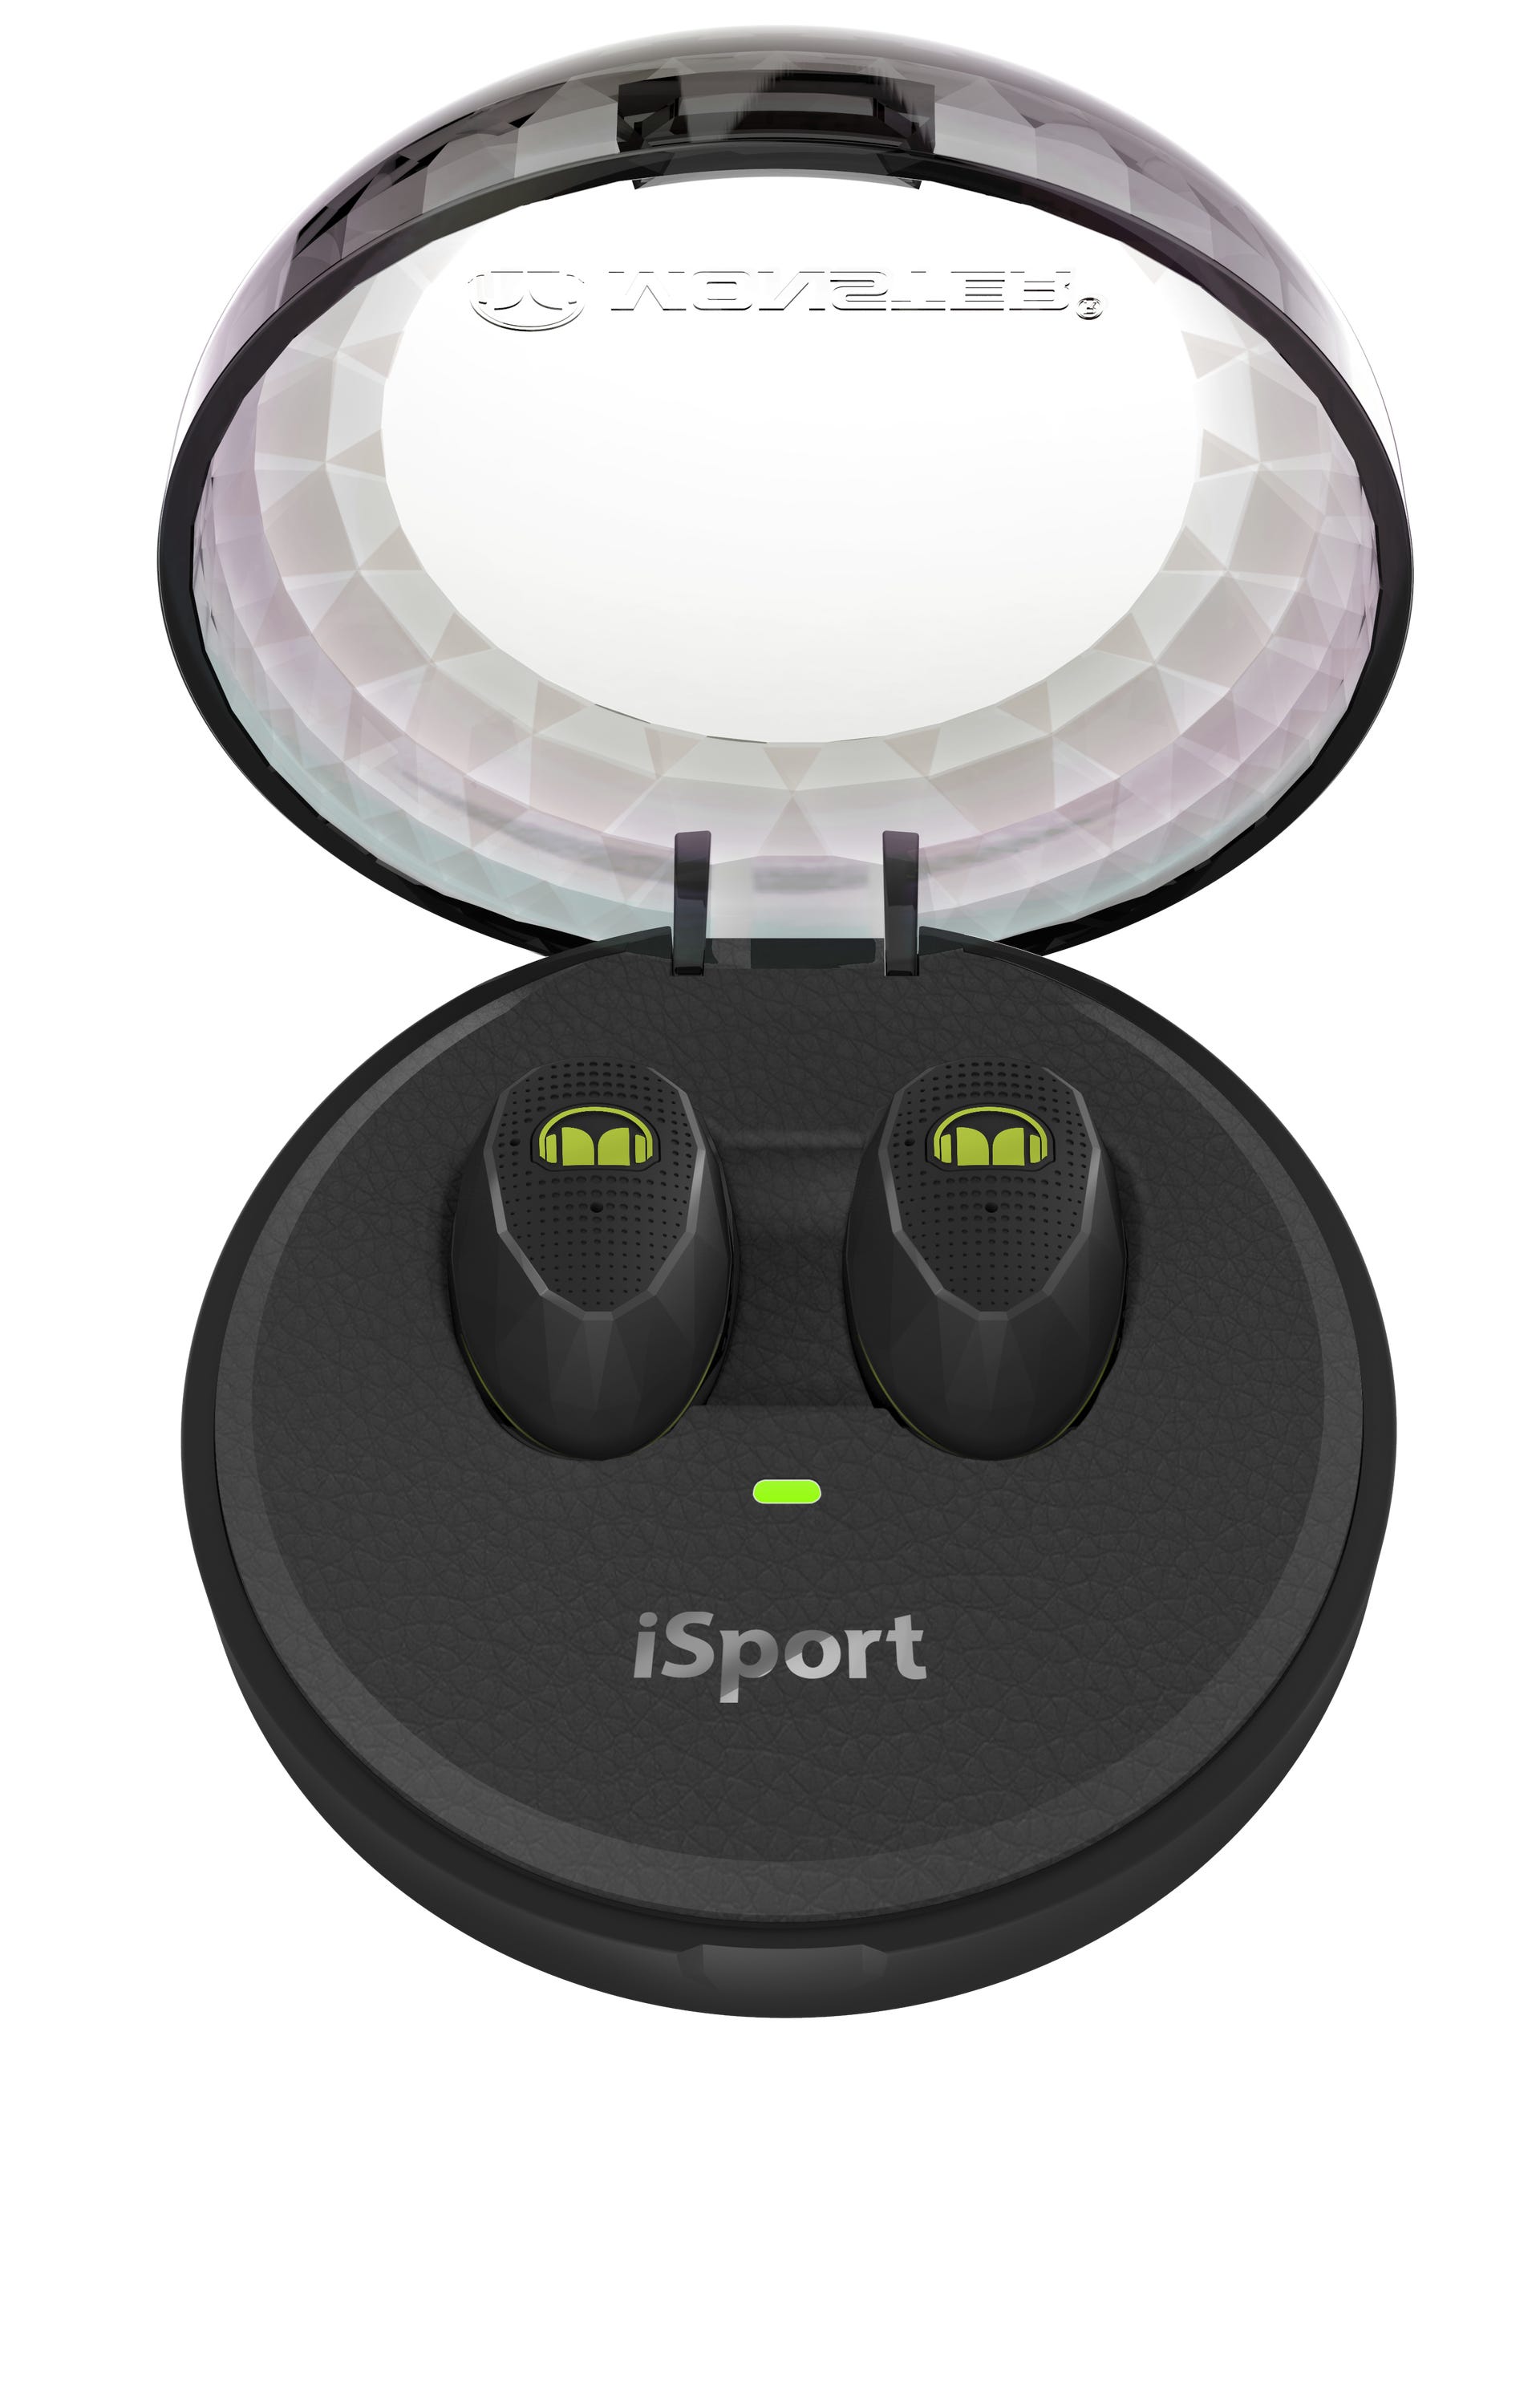 airlink-isport-2